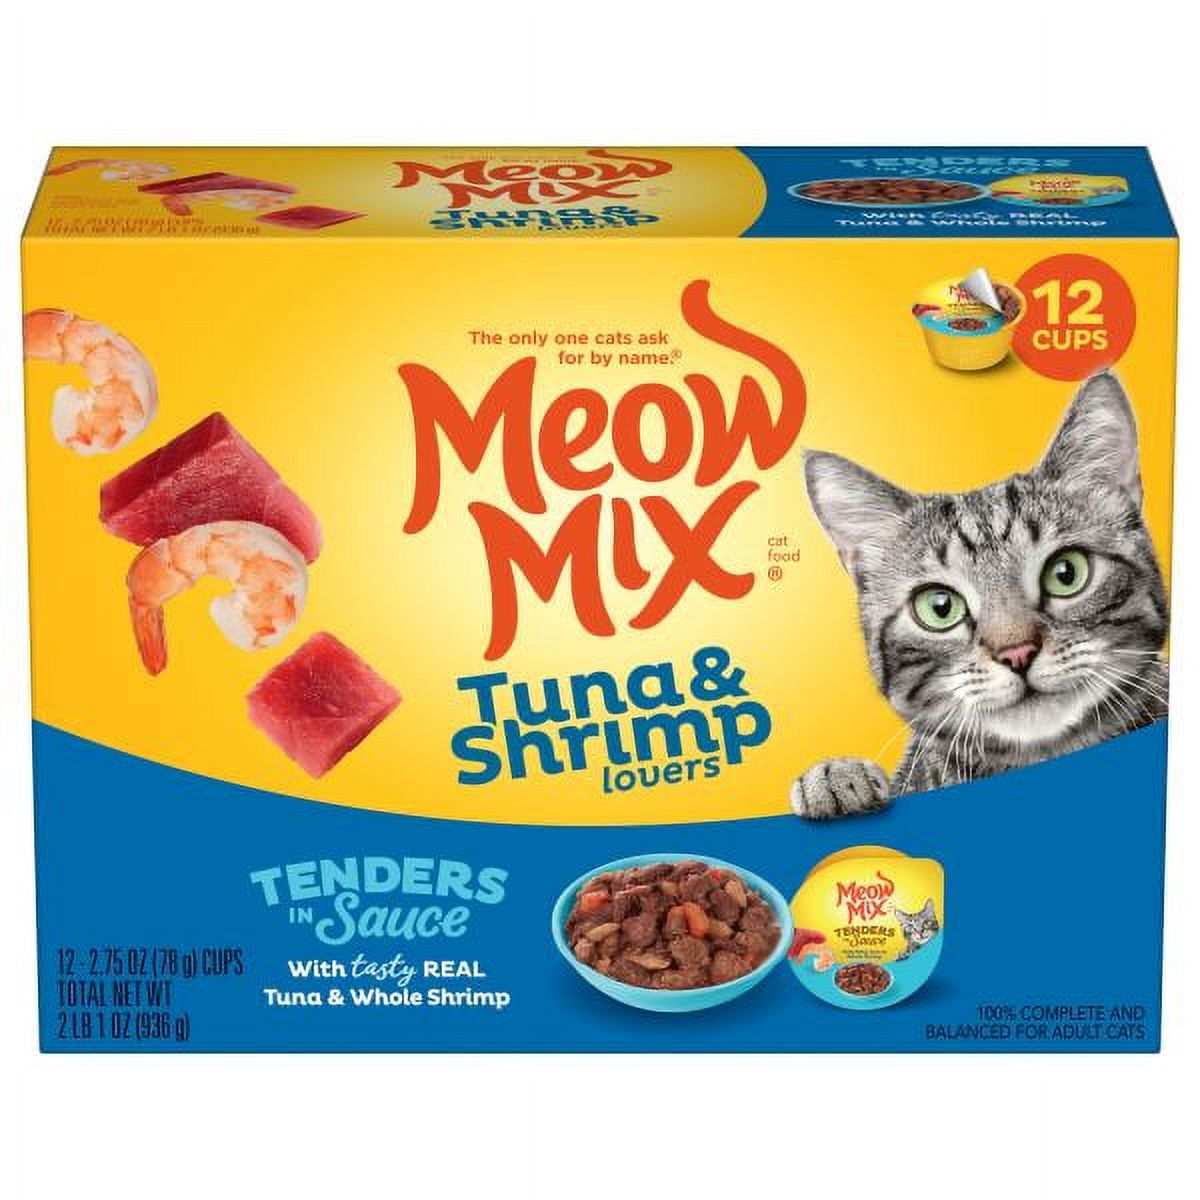 Meow Mix Tender Favorites with Real Tuna & Whole Shrimp in Sauce, 2.75-Ounce - image 5 of 11